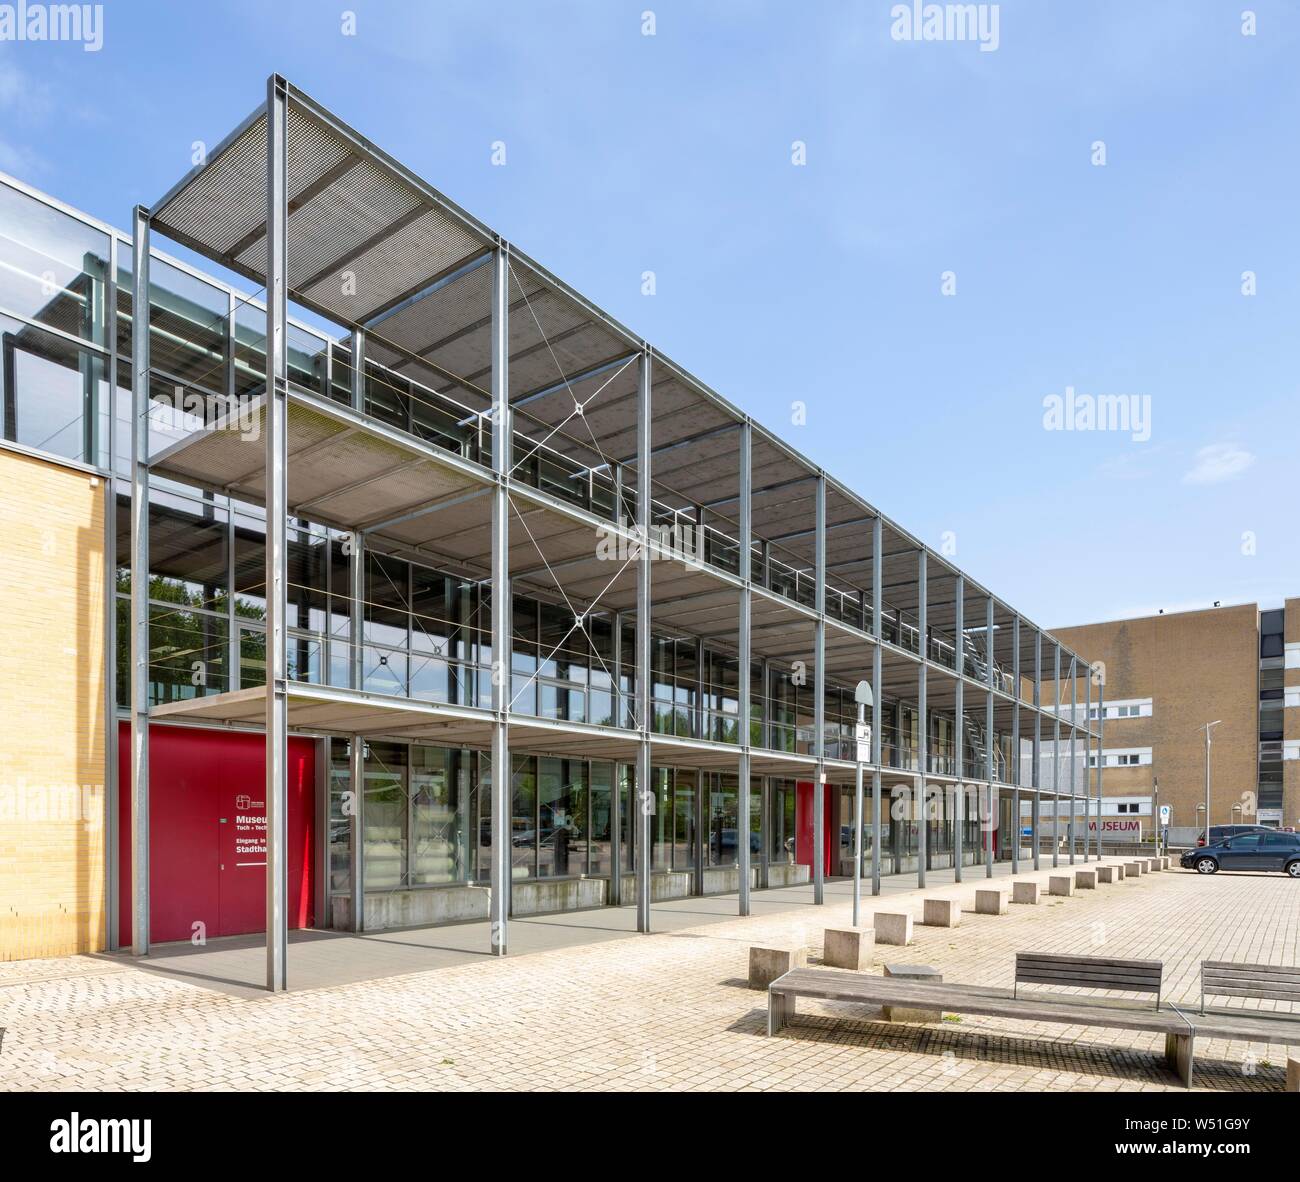 Textile Museum Cloth and Technology, Neumunster, Schleswig-Holstein,  Germany Stock Photo - Alamy